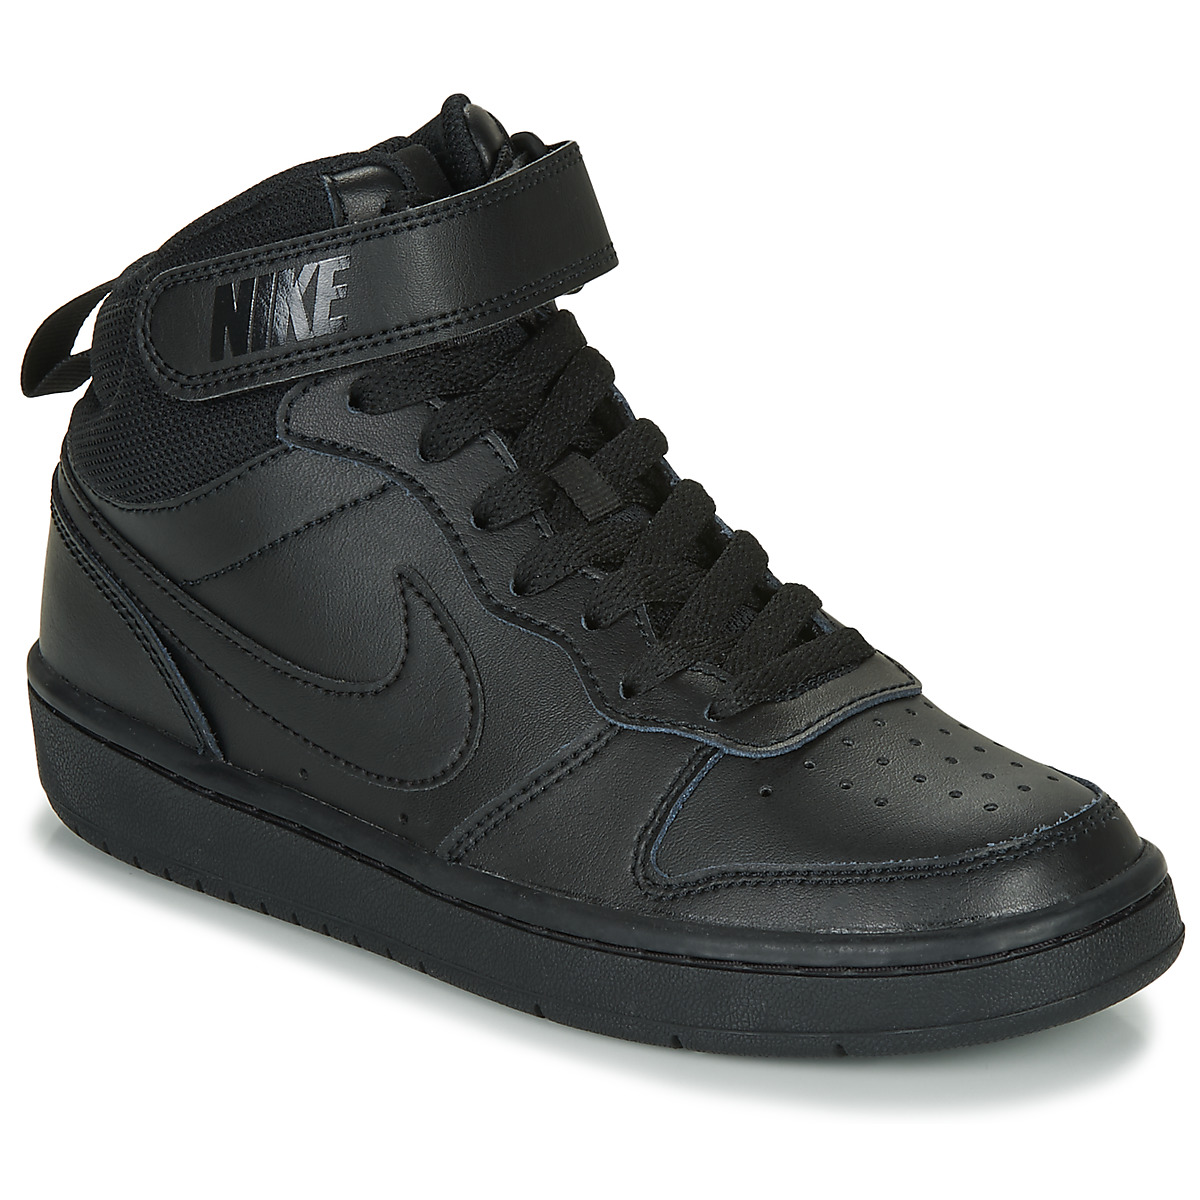 Nike Court Borough Mid 2 Gs Black Fast Delivery Spartoo Europe Shoes Low Top Trainers Child 54 99